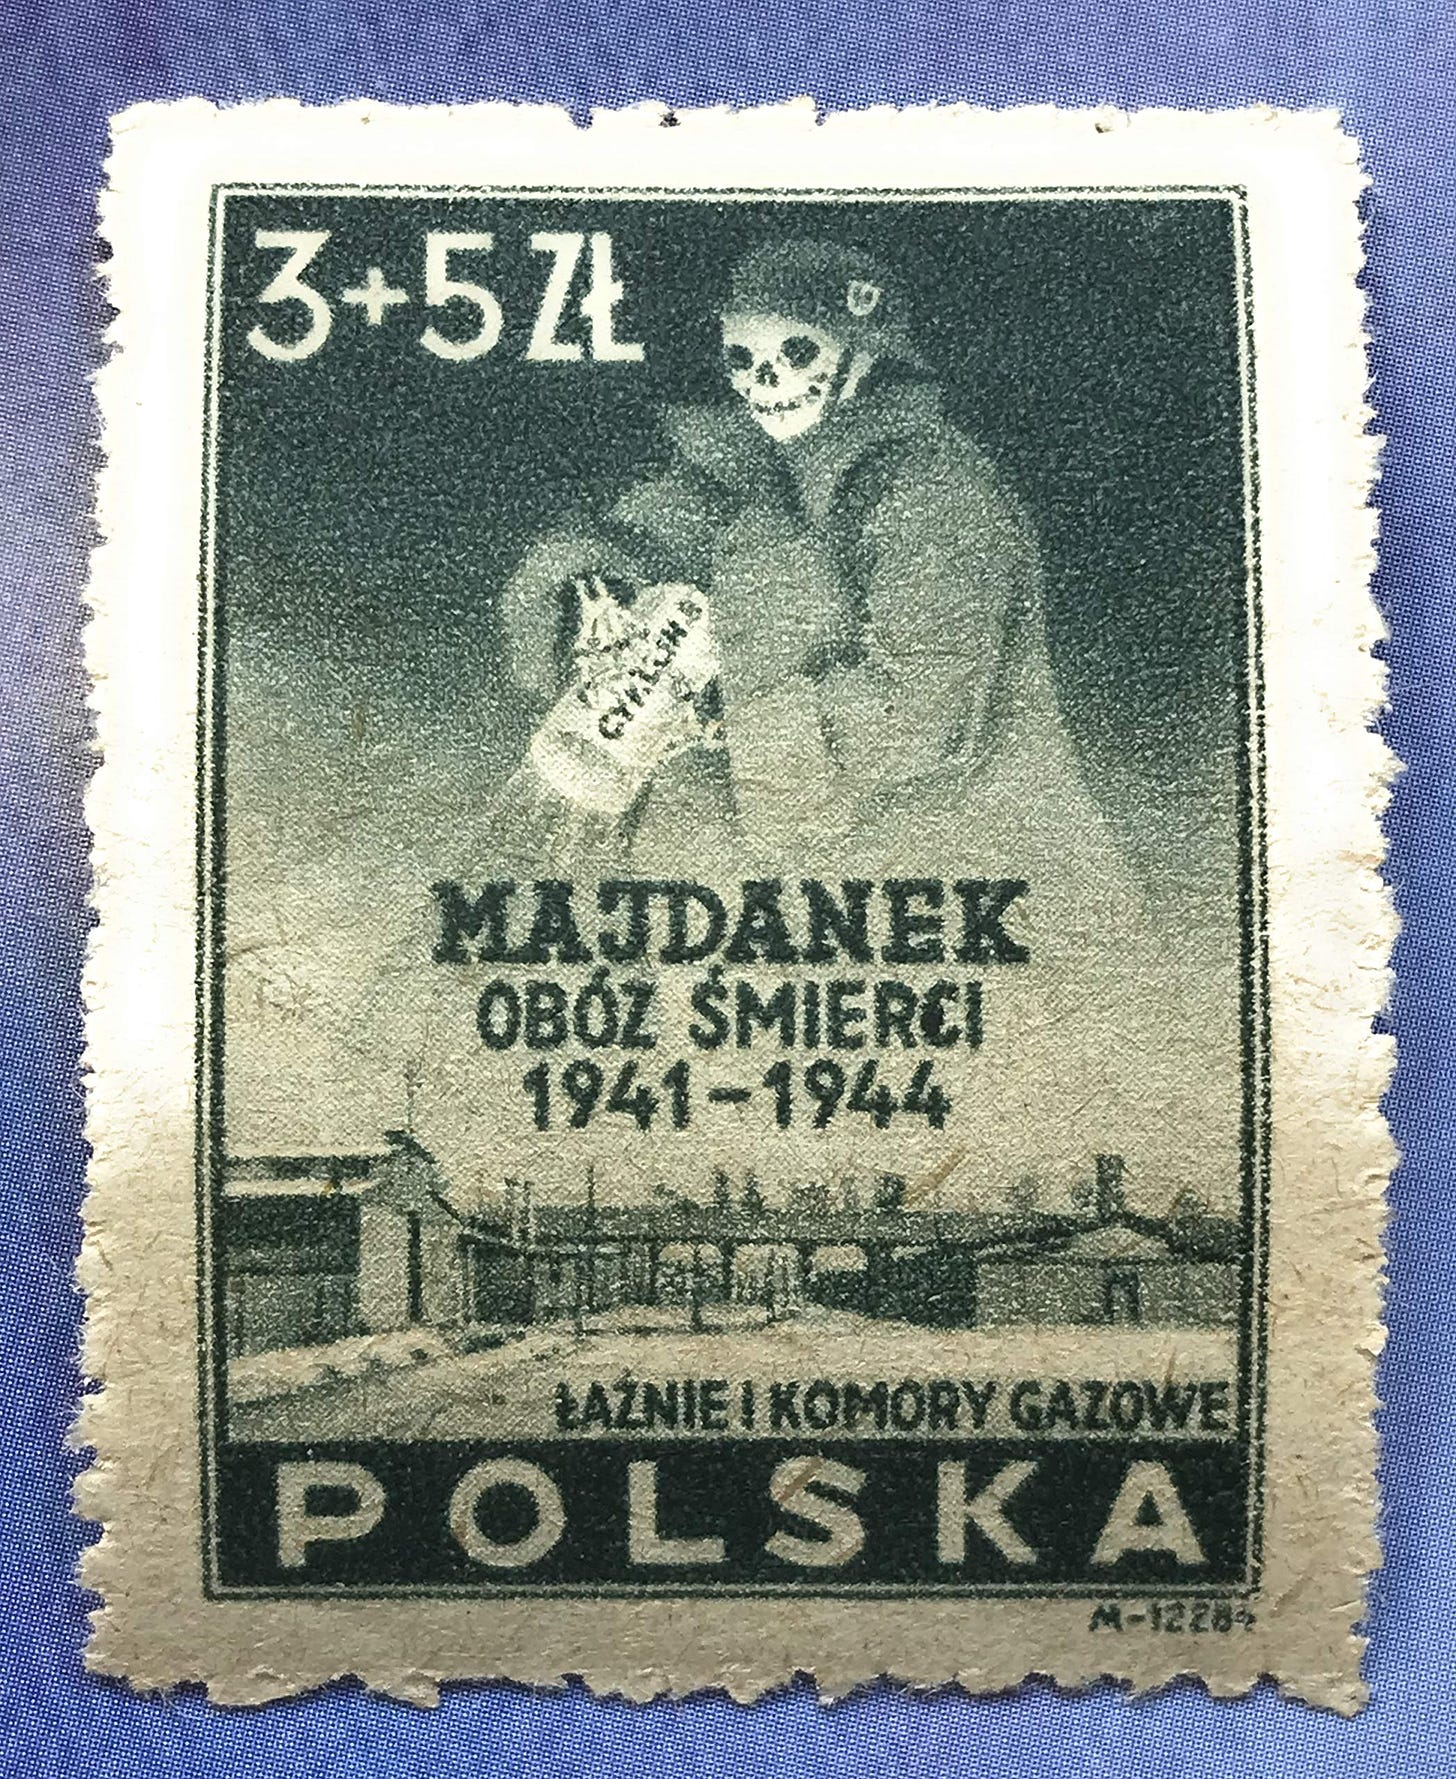 Amazon.com: Poland 1946 Postage Stamp Depicting Skeleton Spraying Zyklon B  Gas Over Lublin Concentration Camp, Catalog No B45, Mint Never Hinged :  Toys & Games